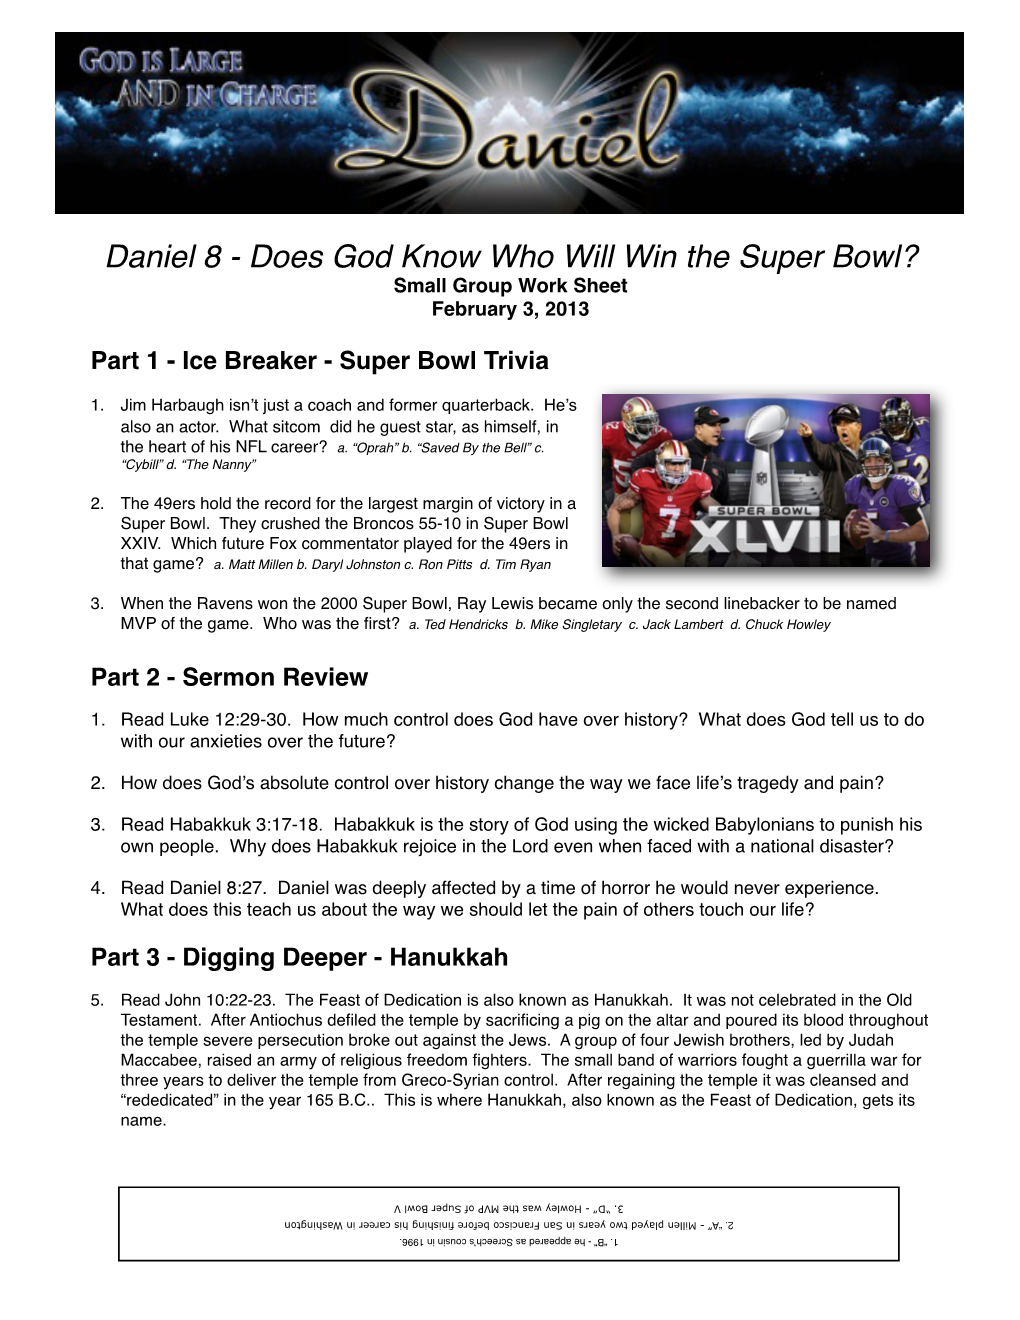 8 - Does God Know Who Will Win the Super Bowl? Small Group Work Sheet February 3, 2013